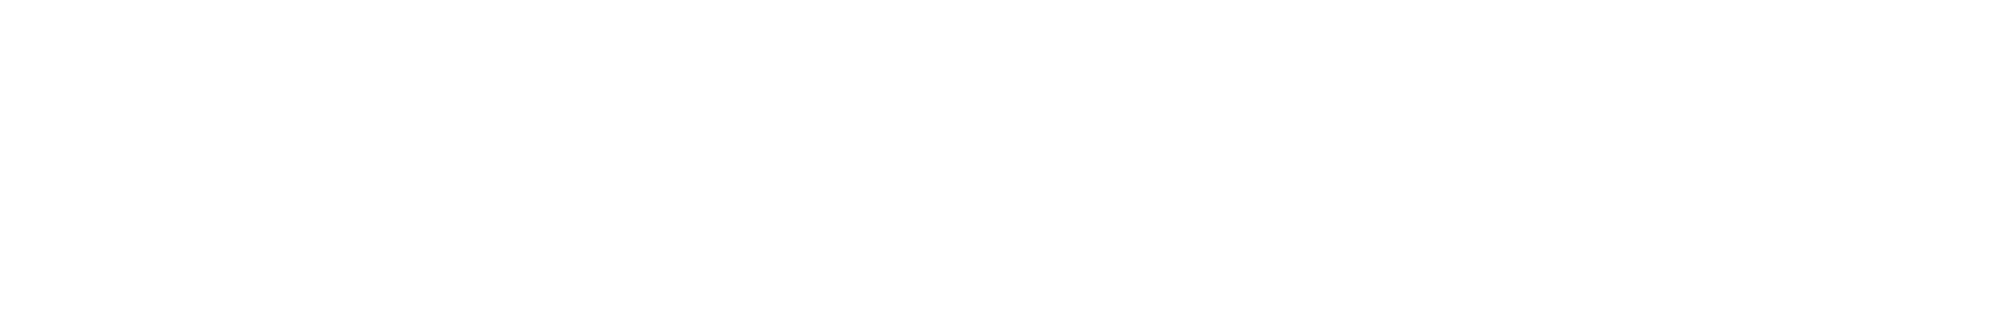 Bluefield University logo with chapel on left horizontal in white.